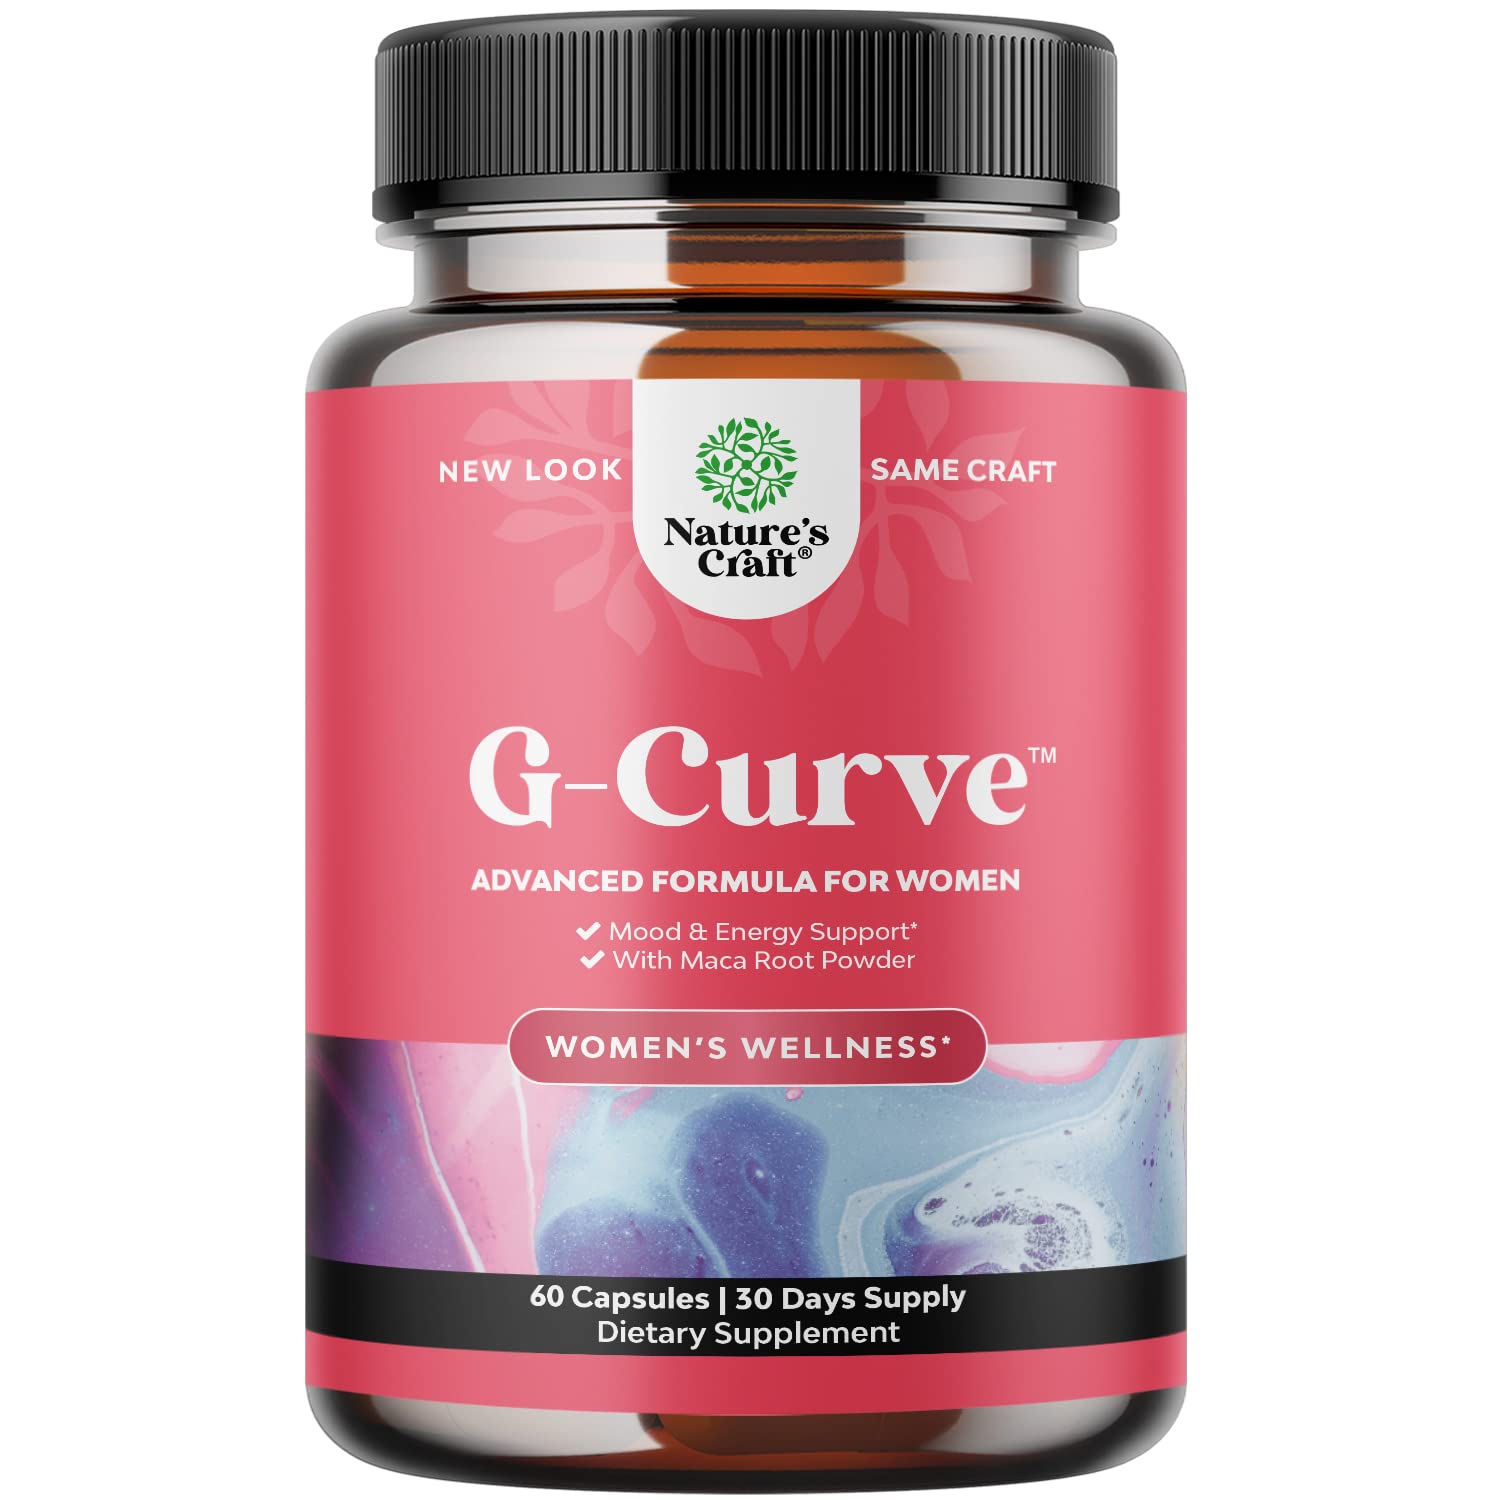 Natures Craft G-Curve Pure and Potent